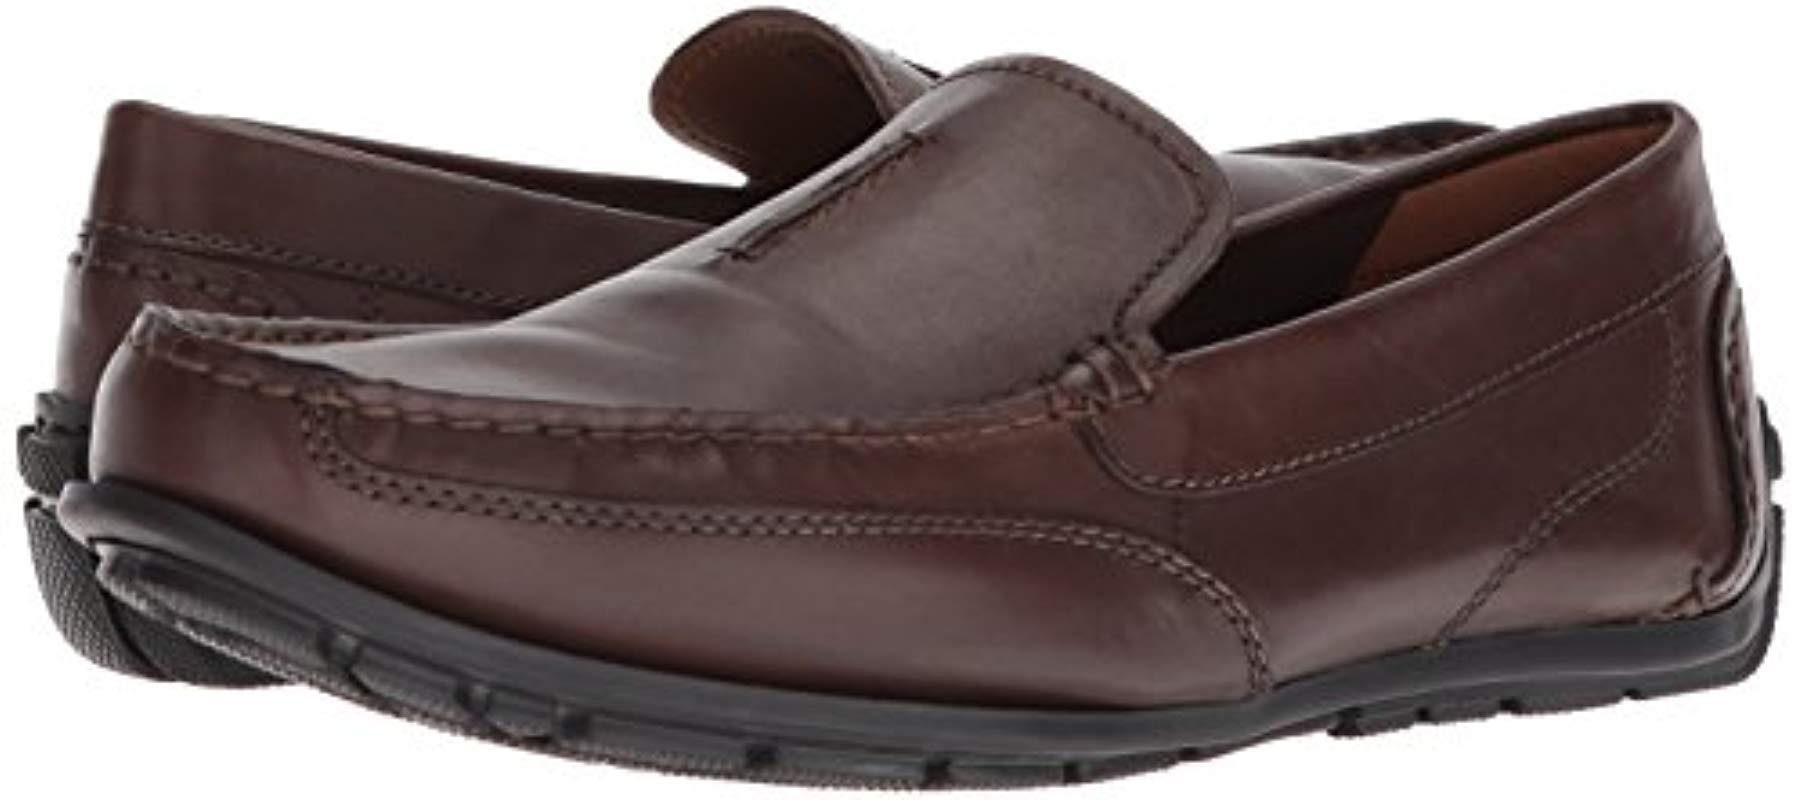 Benero Race Driving Style Loafer 